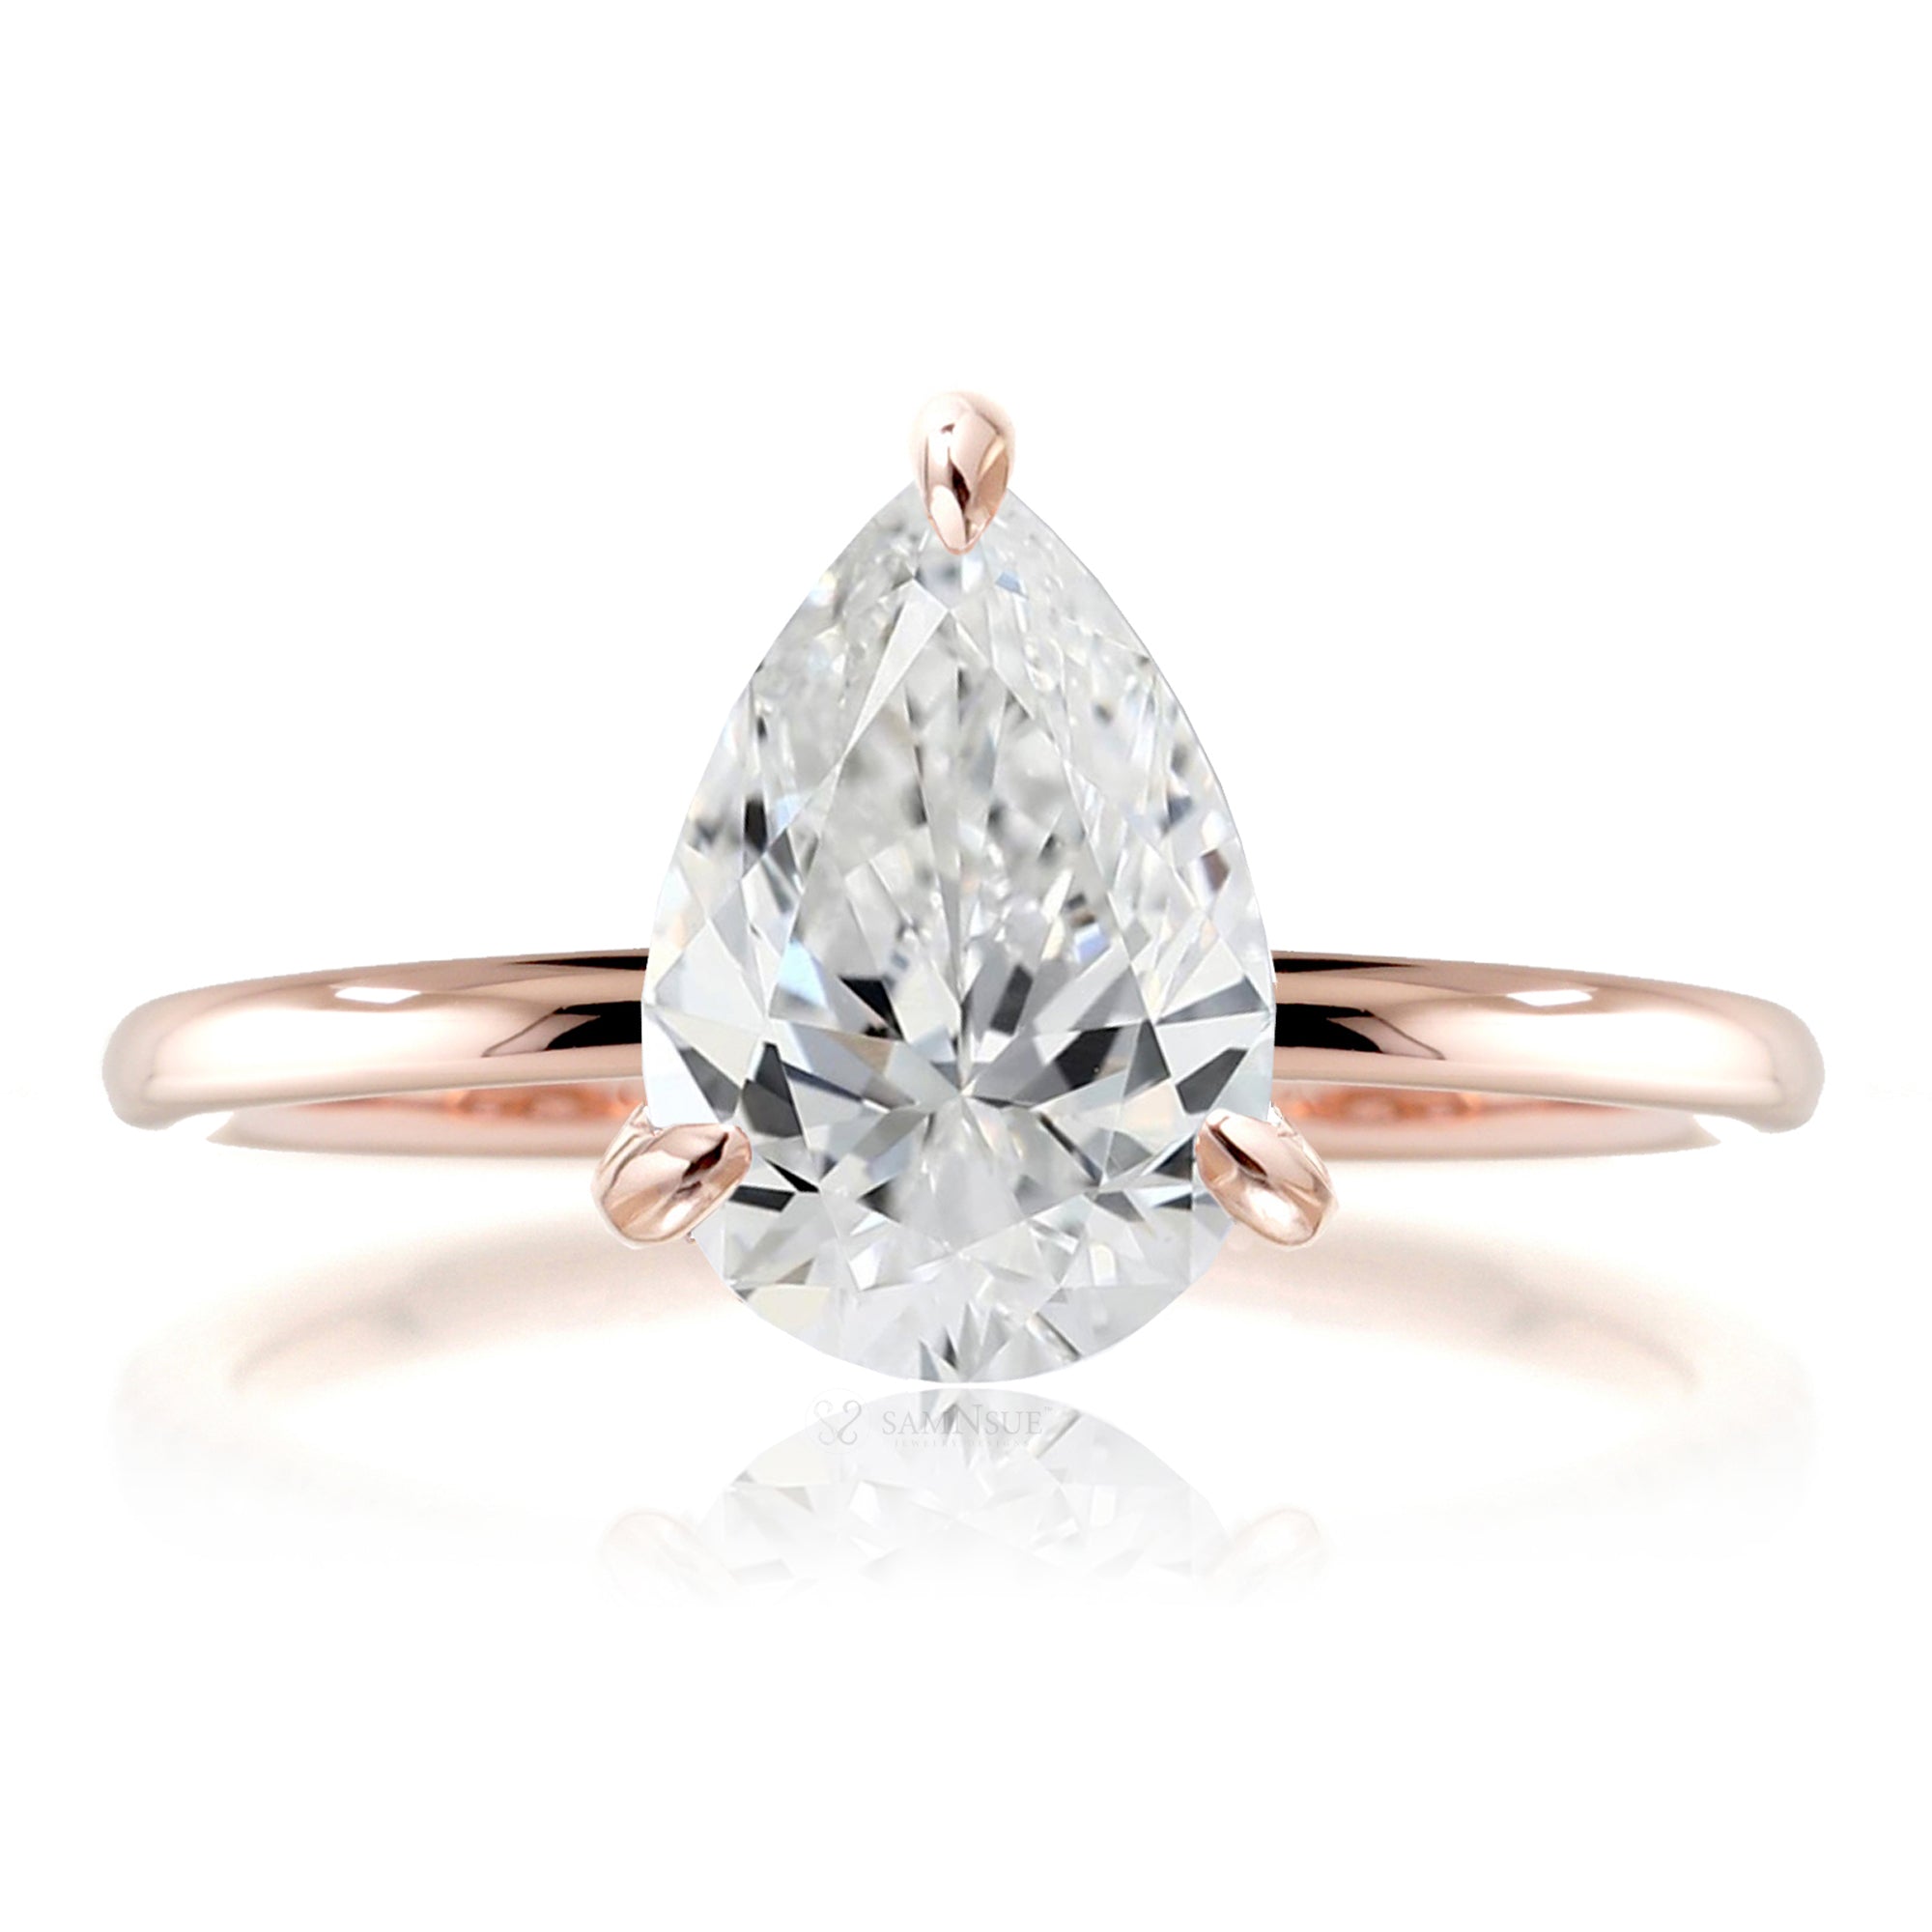 Pear cut lab-grown diamond engagement ring rose gold - The Ava solid band